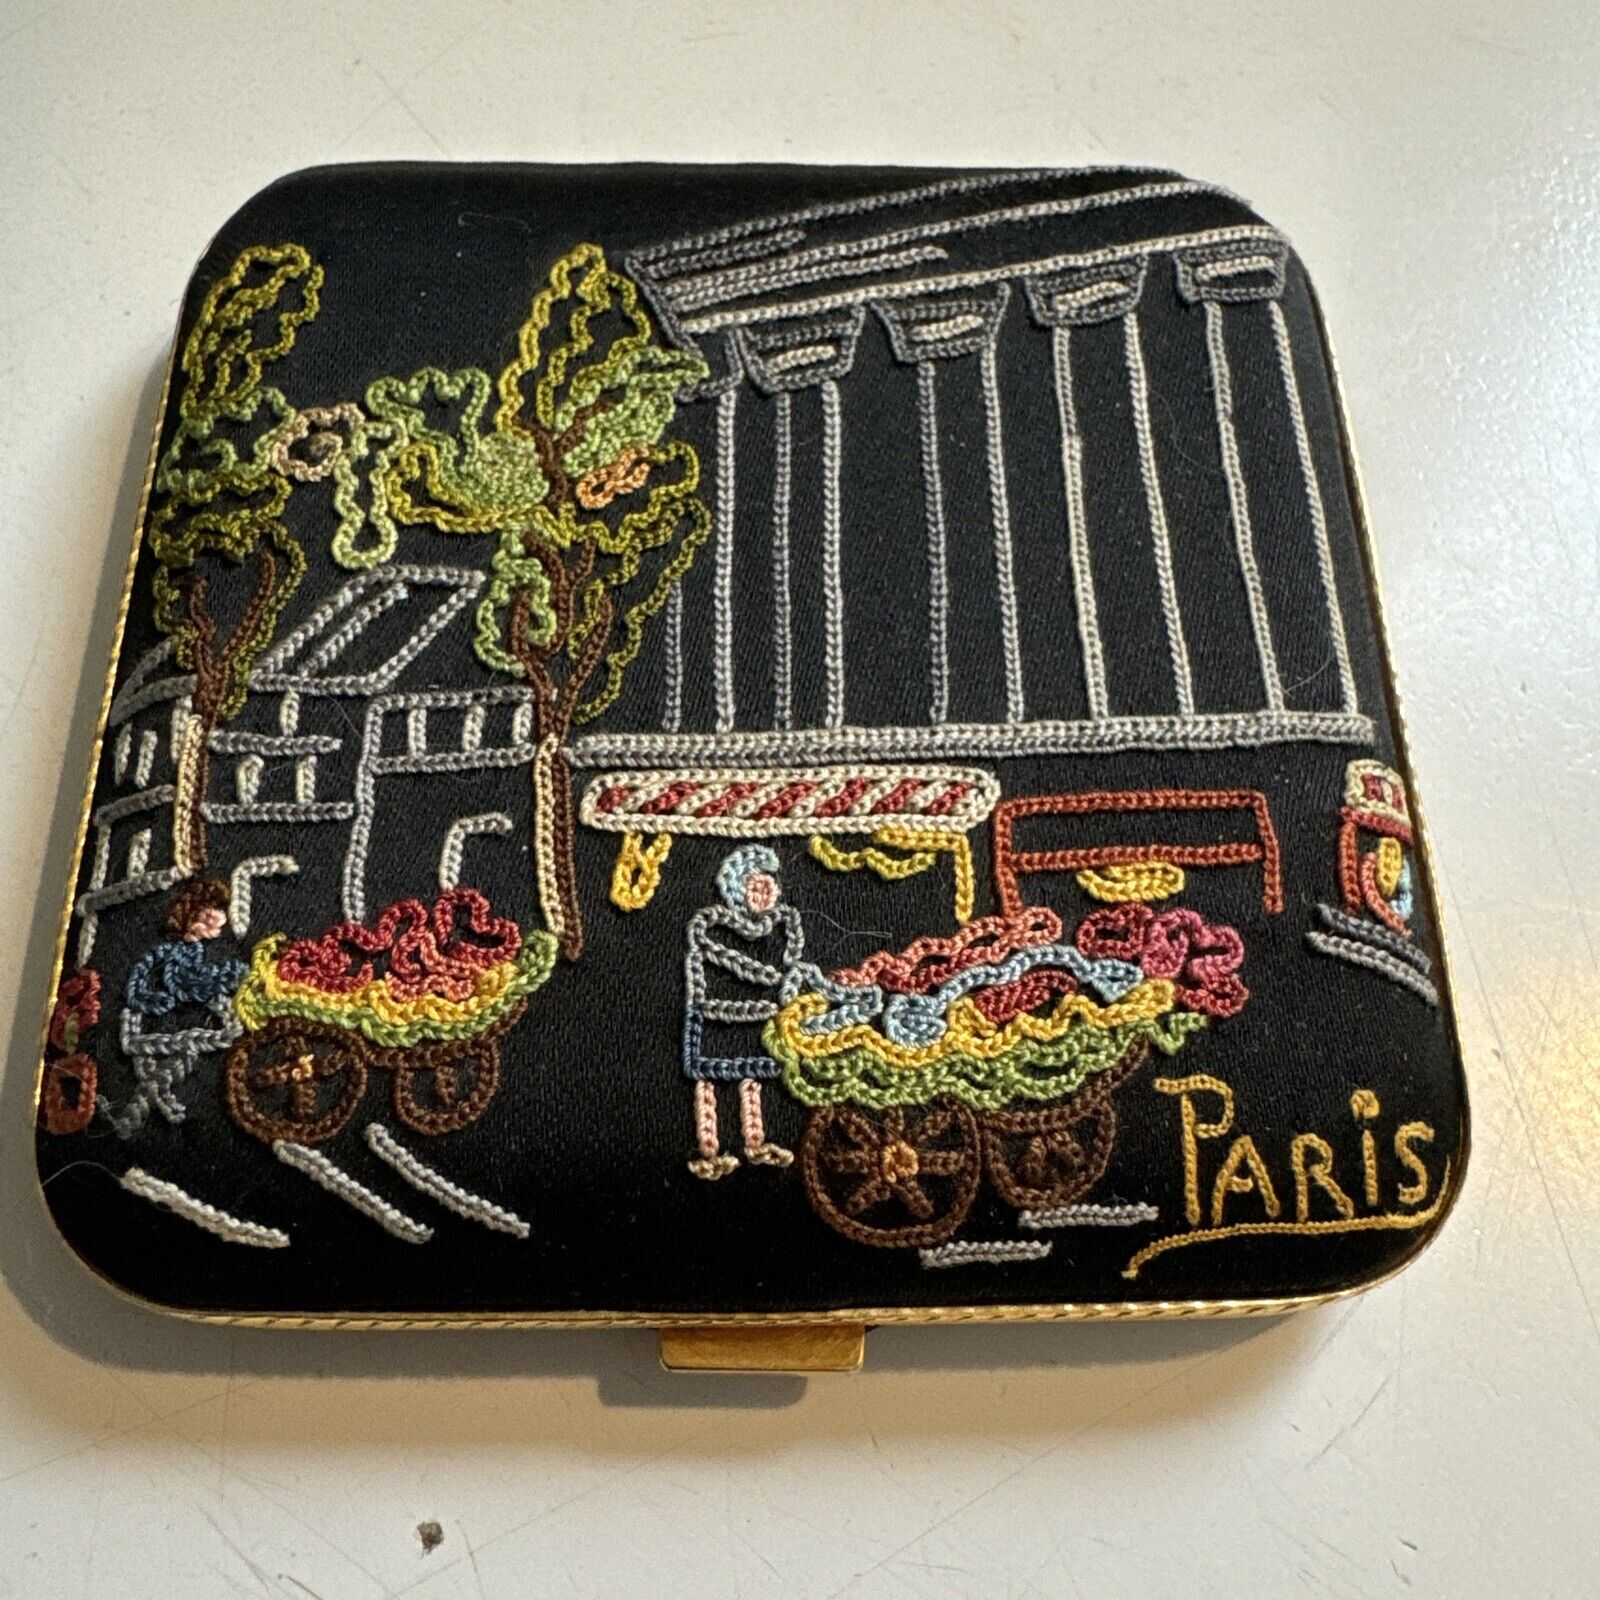 VTG FRENCH POWDER COMPACT BRODERIE MAIN FRANCE Street Scene Embroidered Black